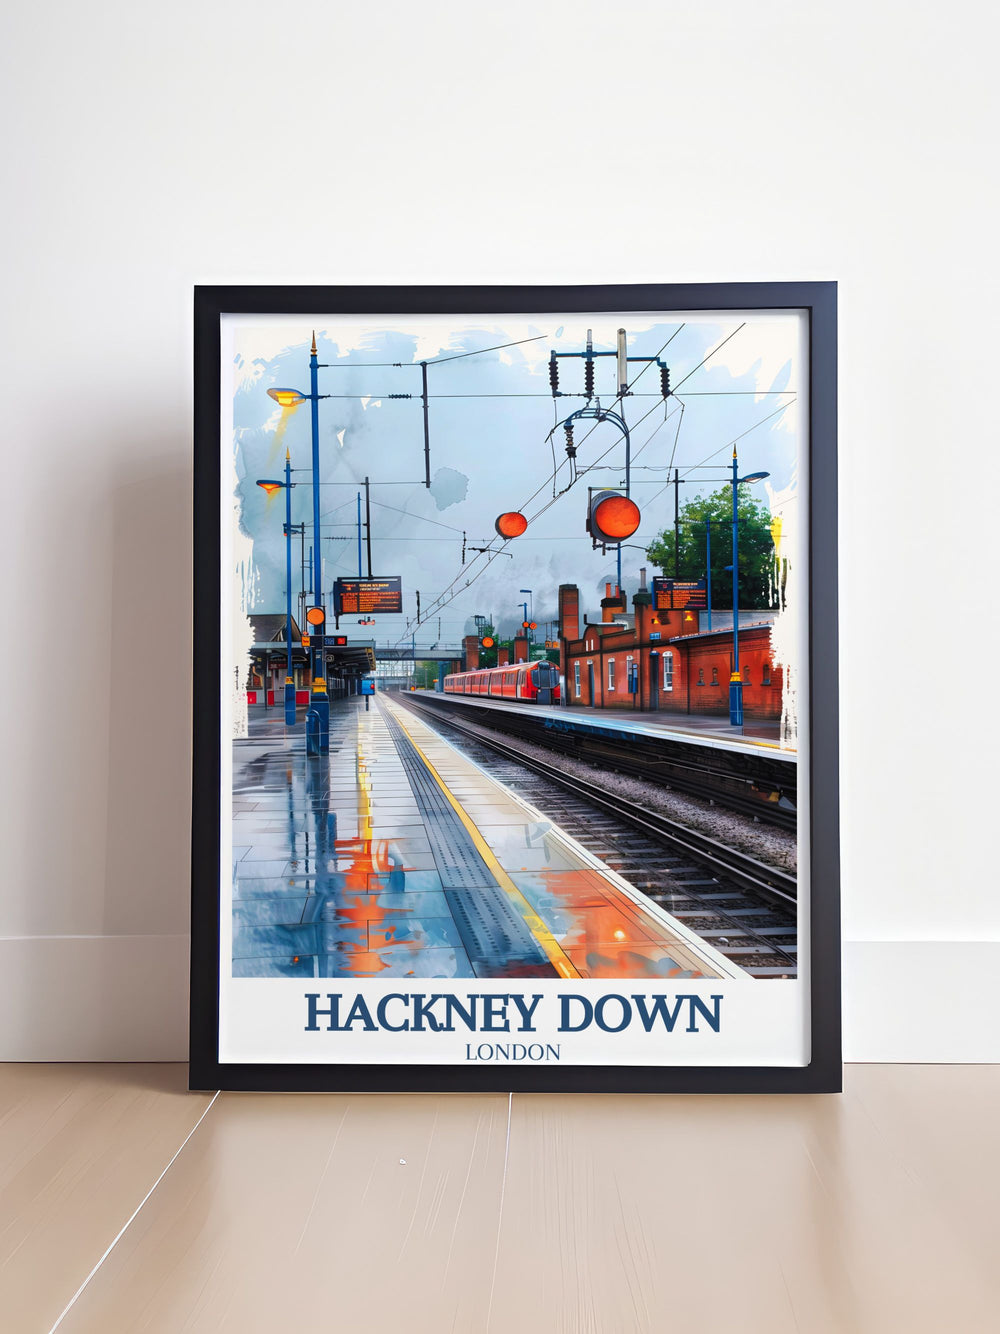 Showcasing the historic St. Augustines Tower, this travel poster captures the medieval charm and architectural beauty of Hackneys oldest building, ideal for history enthusiasts.